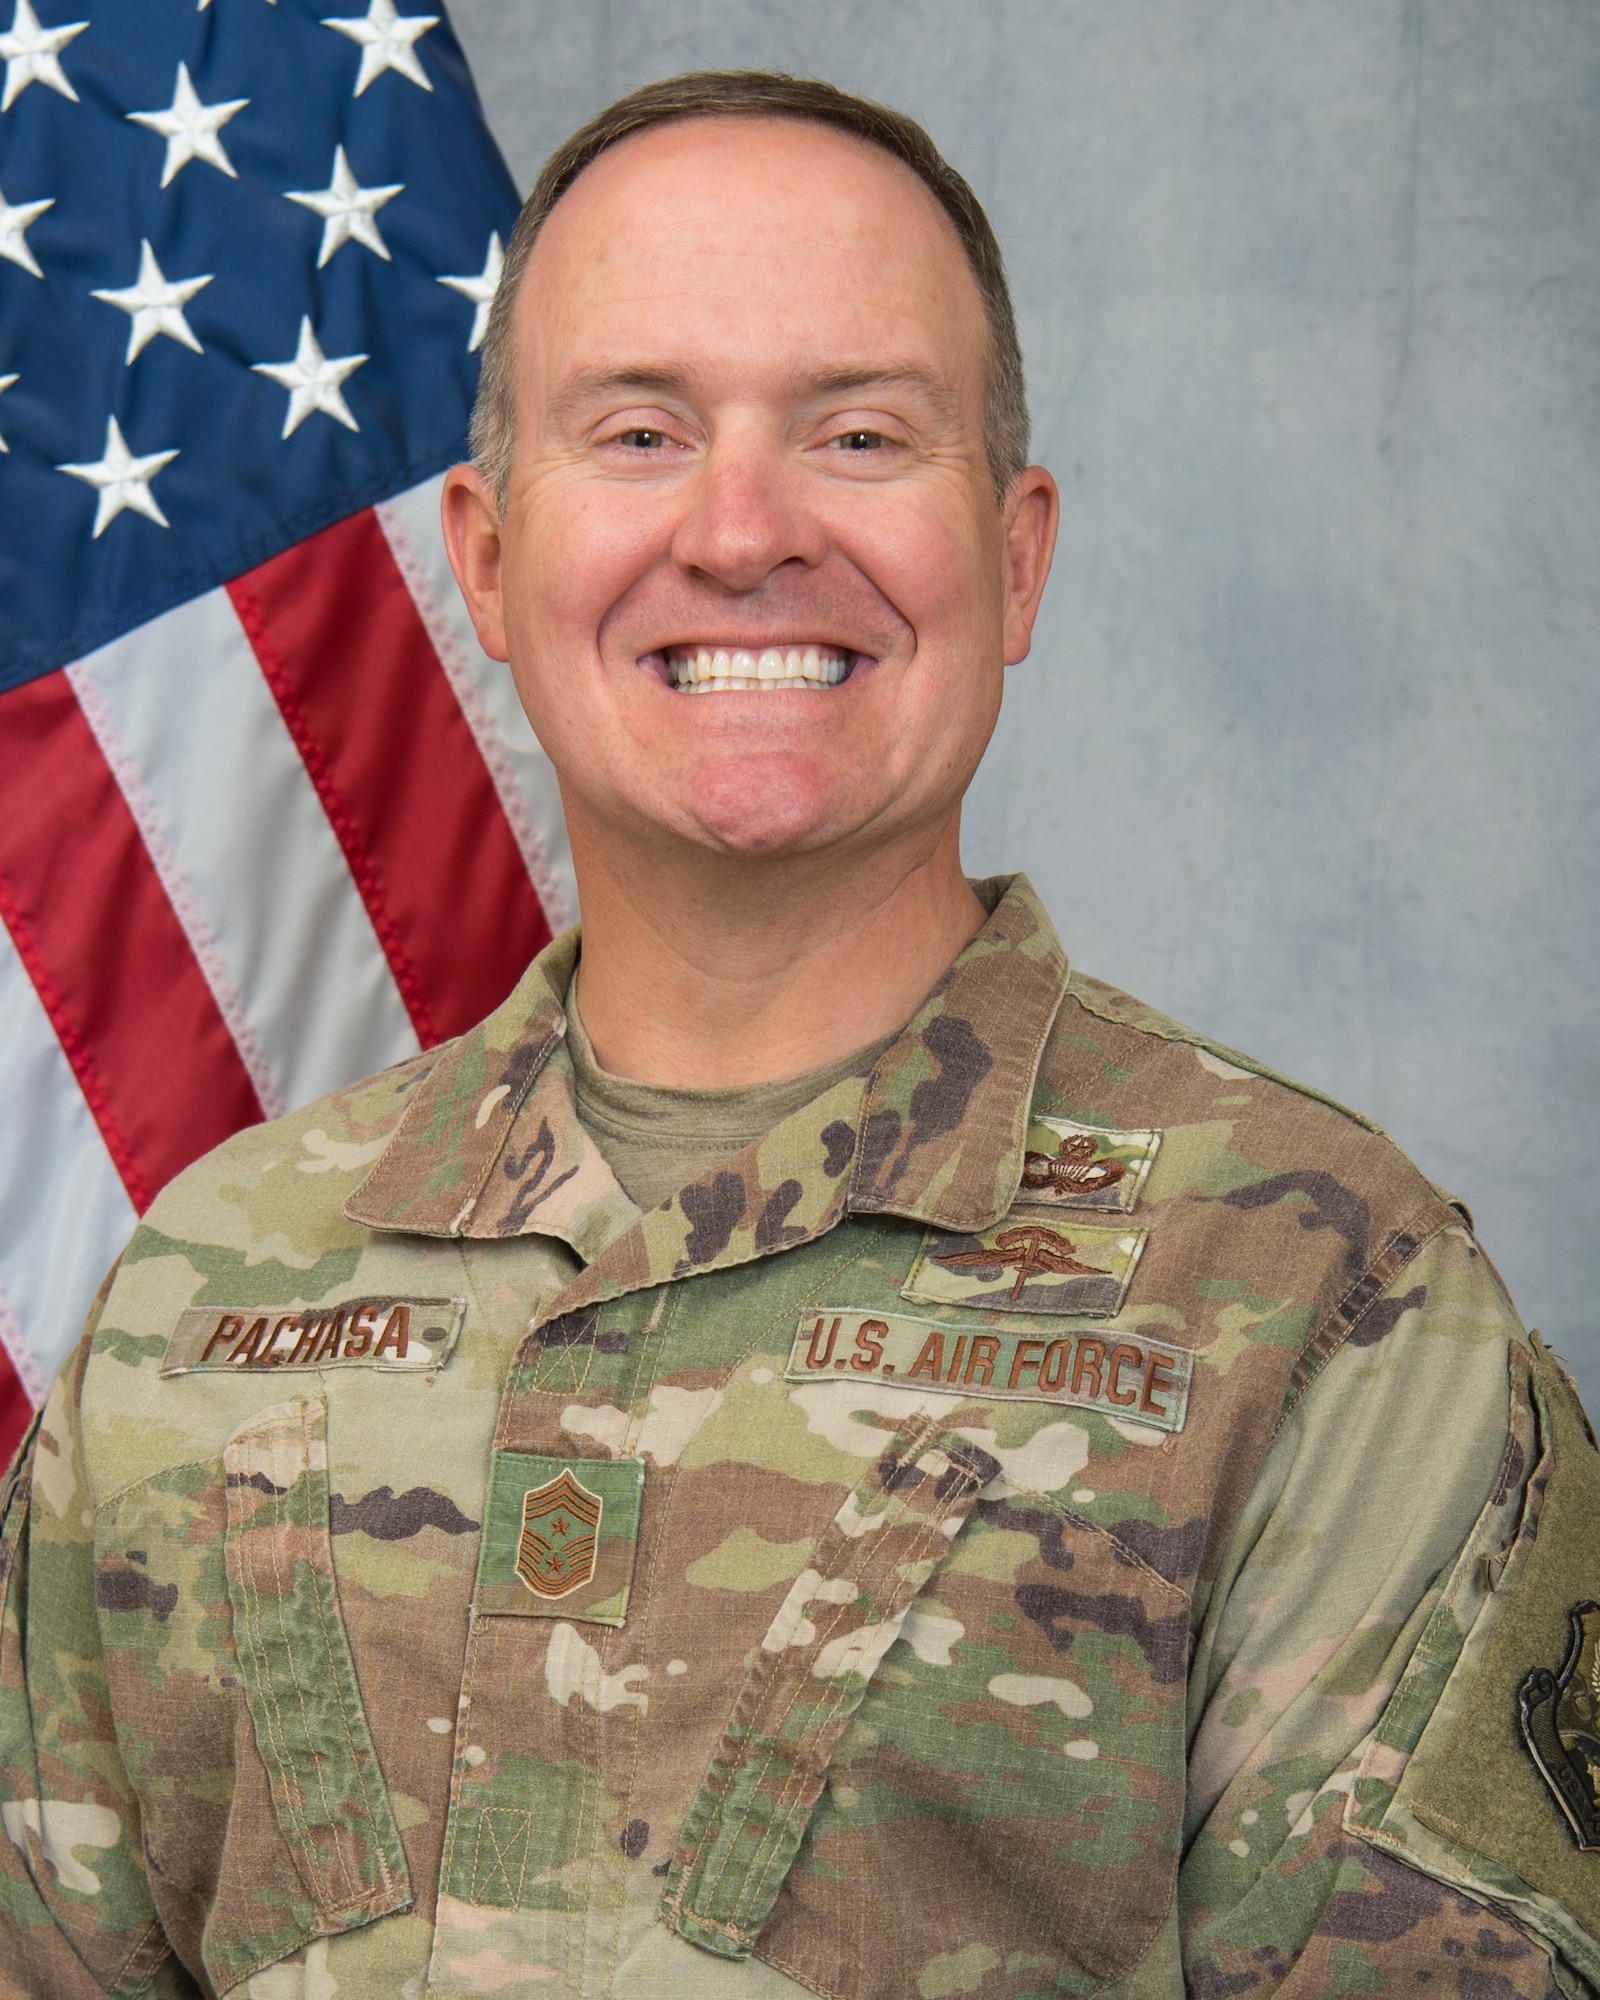 Chief Master Sgt. Timothy Pachasa, 386th Air Expeditionary Wing command chief, official photo.